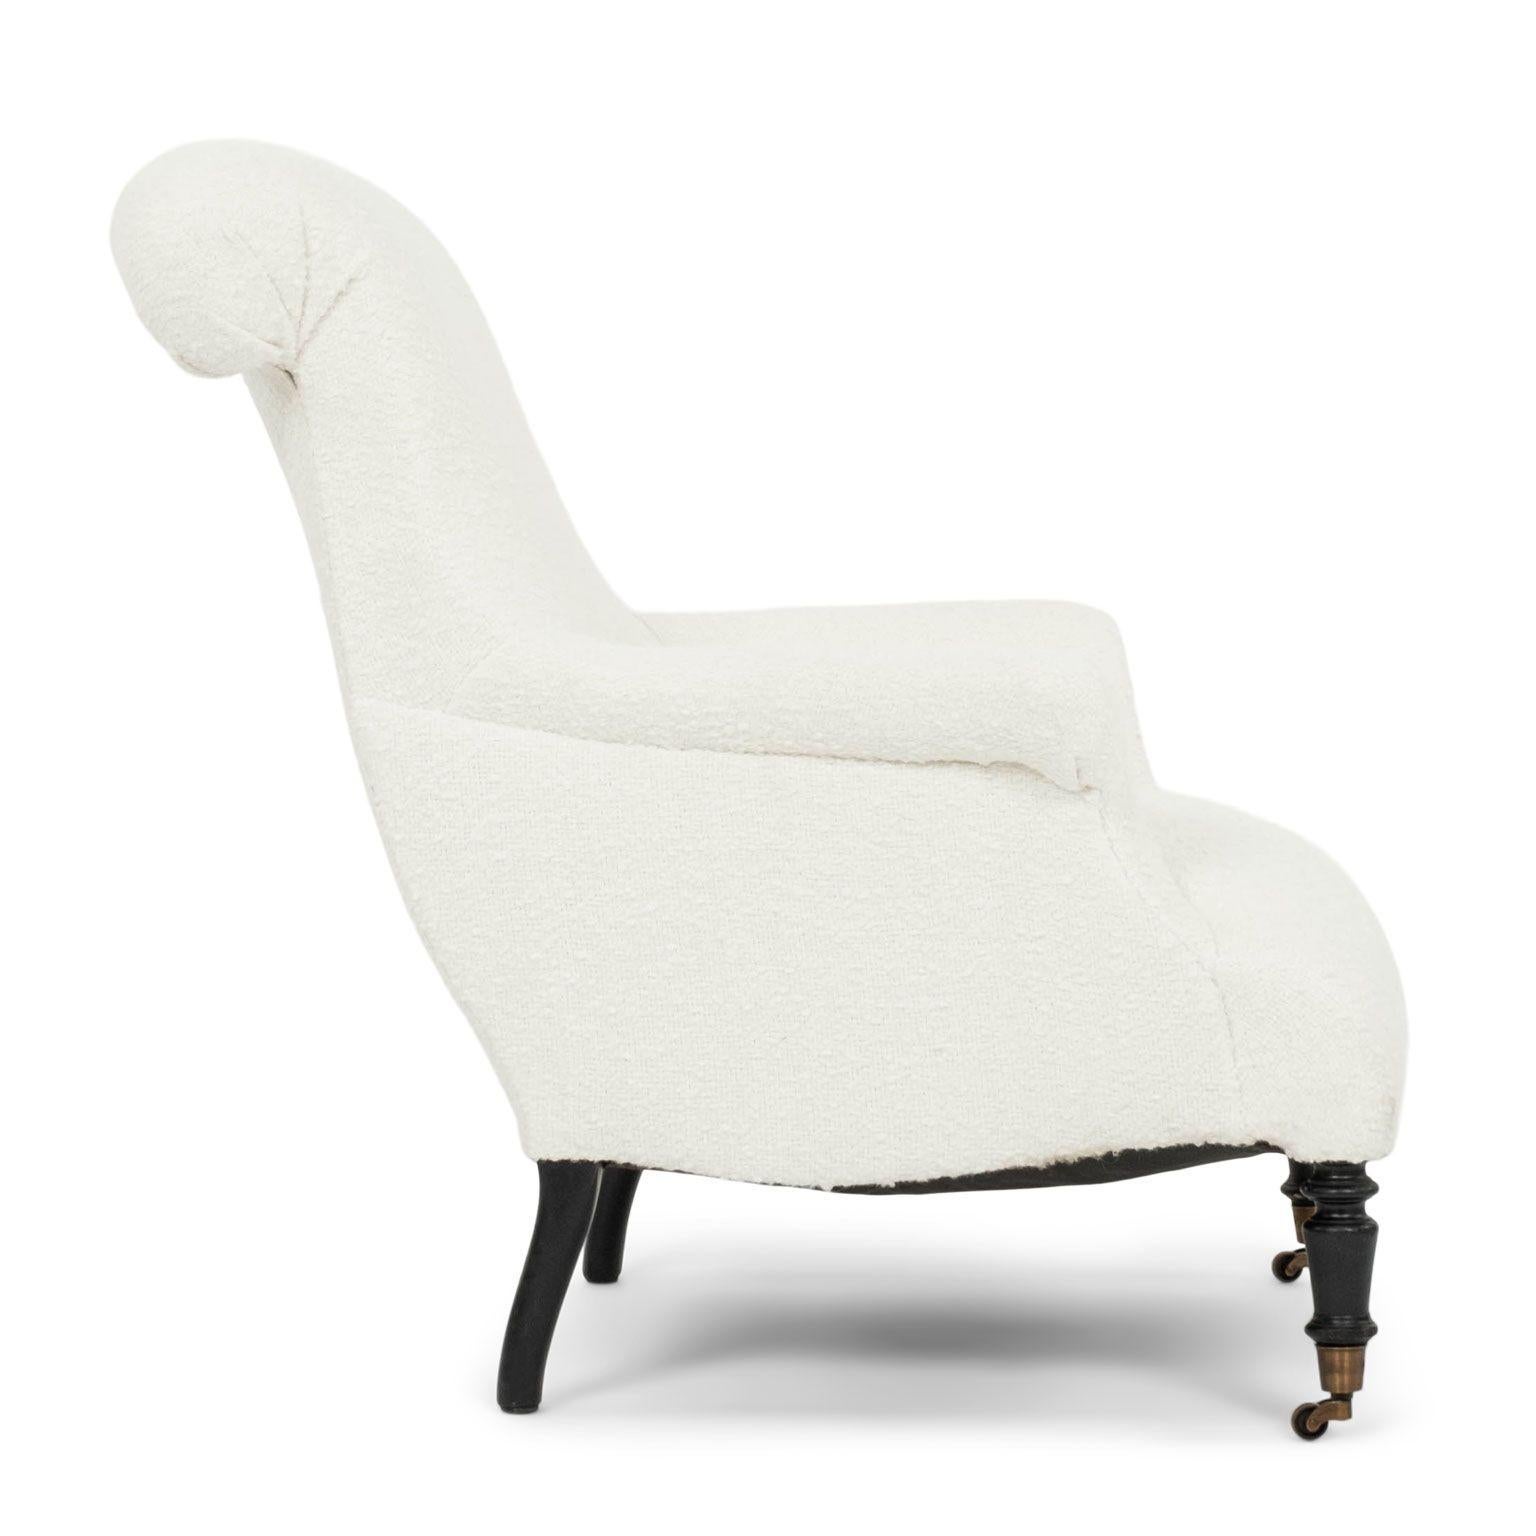 Large French Napoloeon III Armchair upholstered in off-white boucle circa 1865-1884. New brass casters on front legs.

Note: Original/early finish on antique and vintage metal will include some, or all, of the following: patina, scaling, light rust,